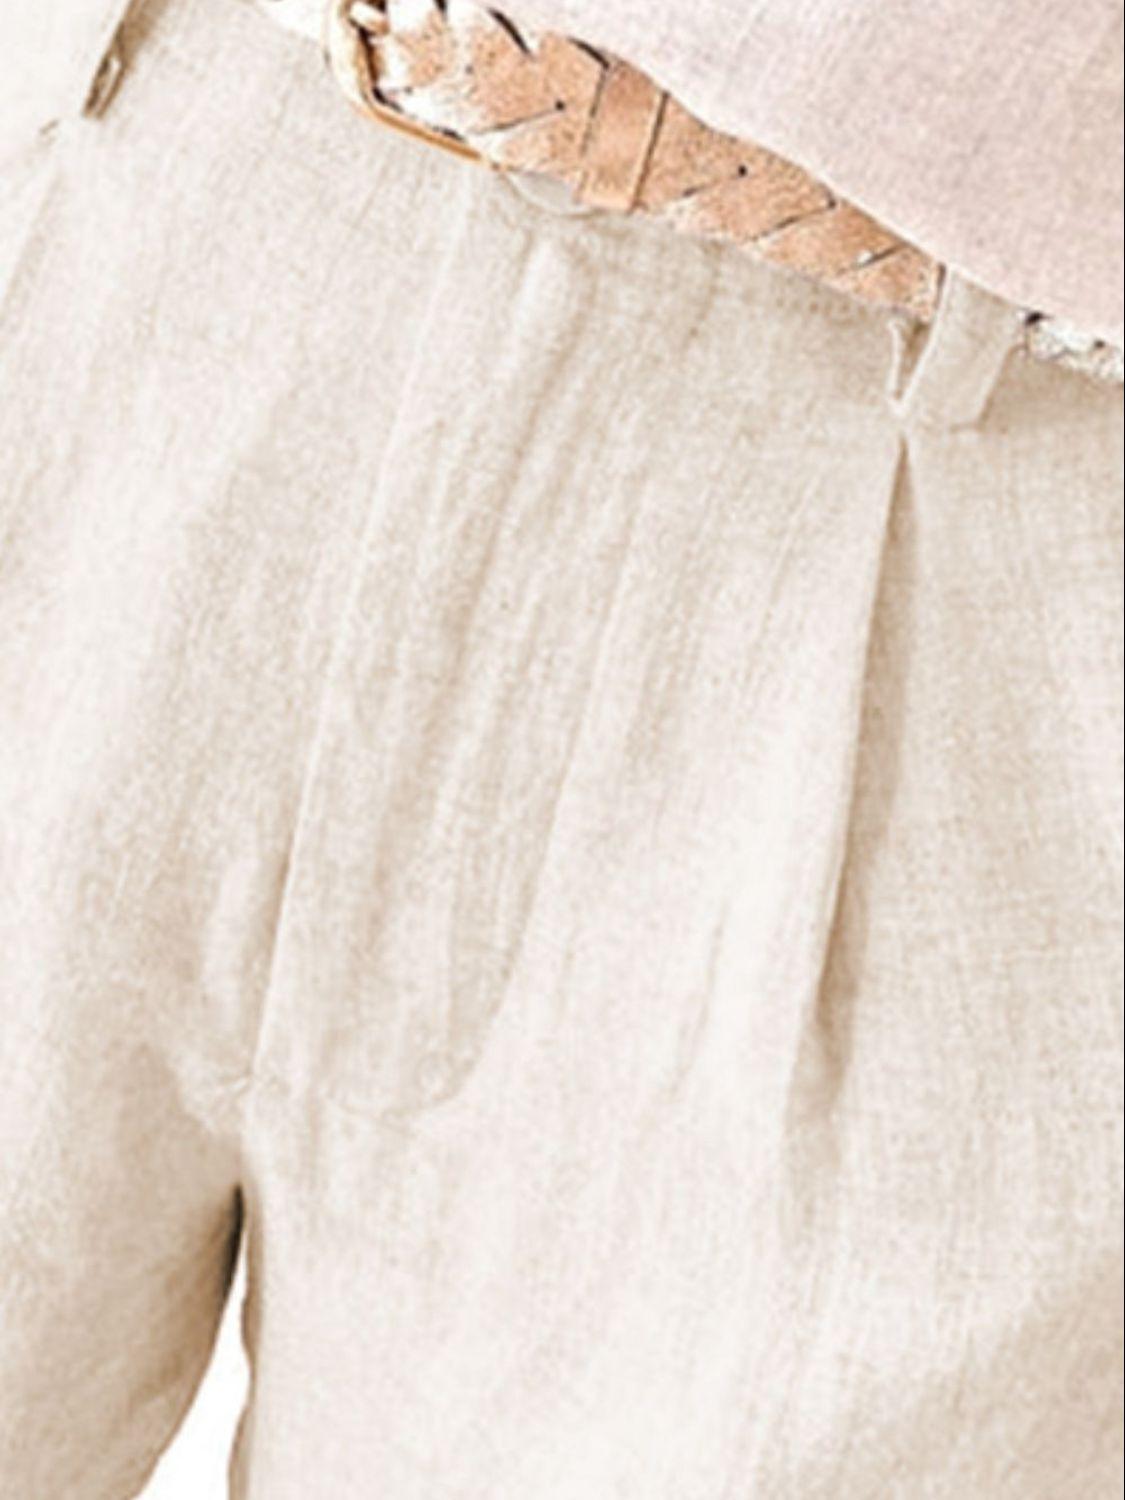 a close up of a person's pants with a belt